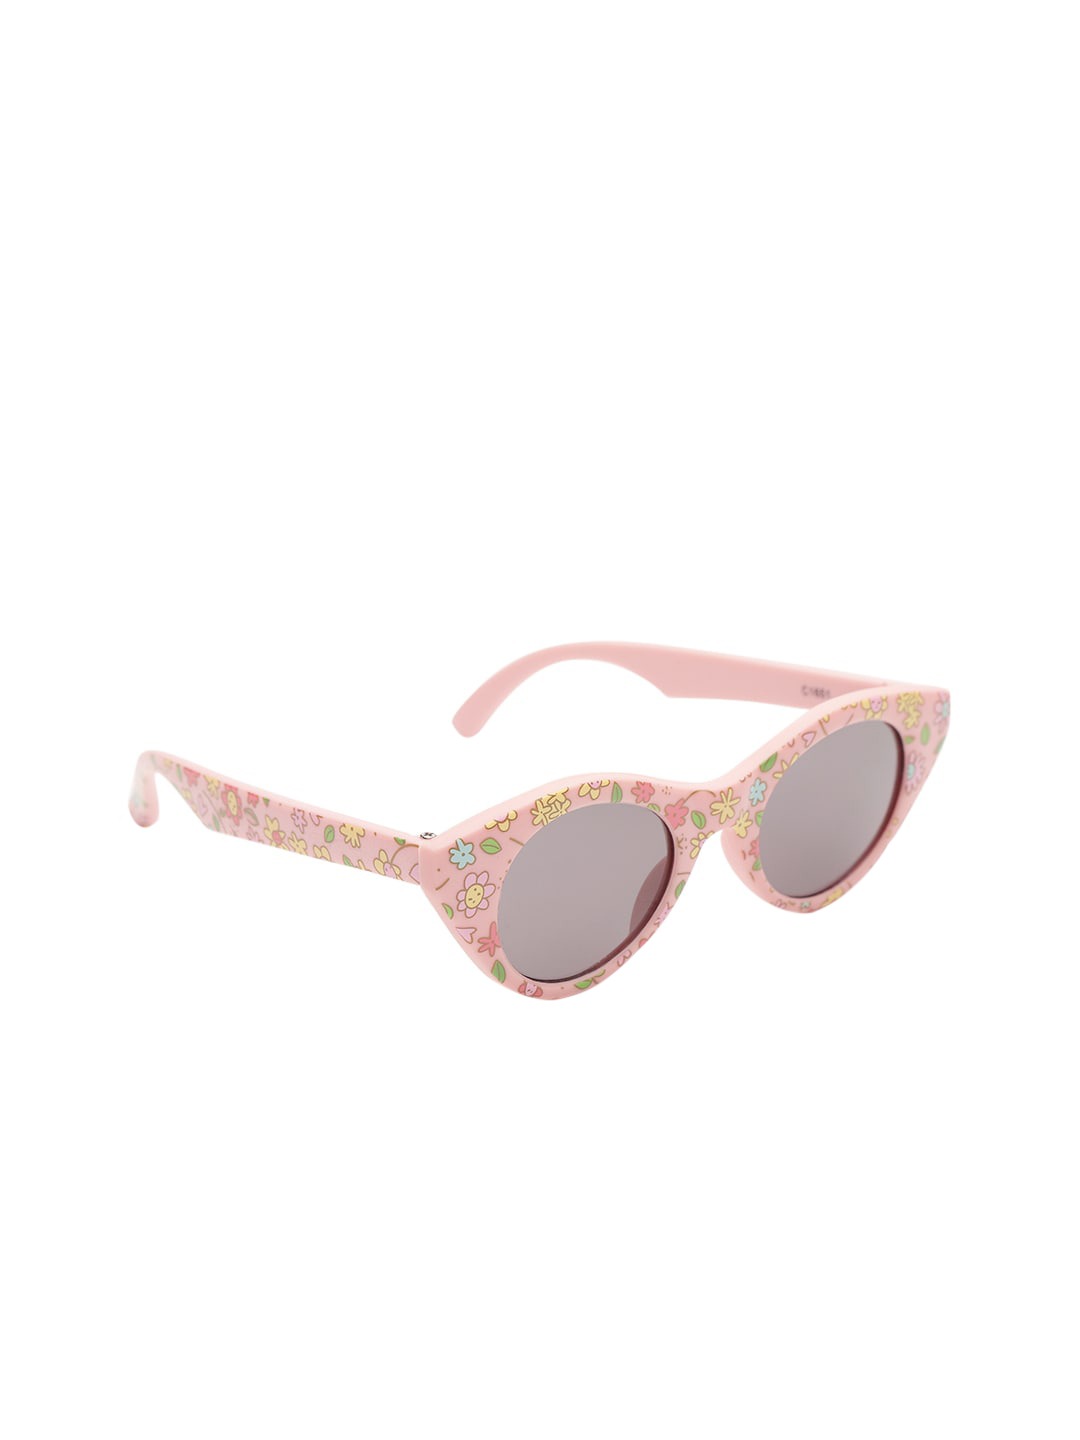 Carlton London Cateye Sunglasses With Uv Protected Lens For Girl